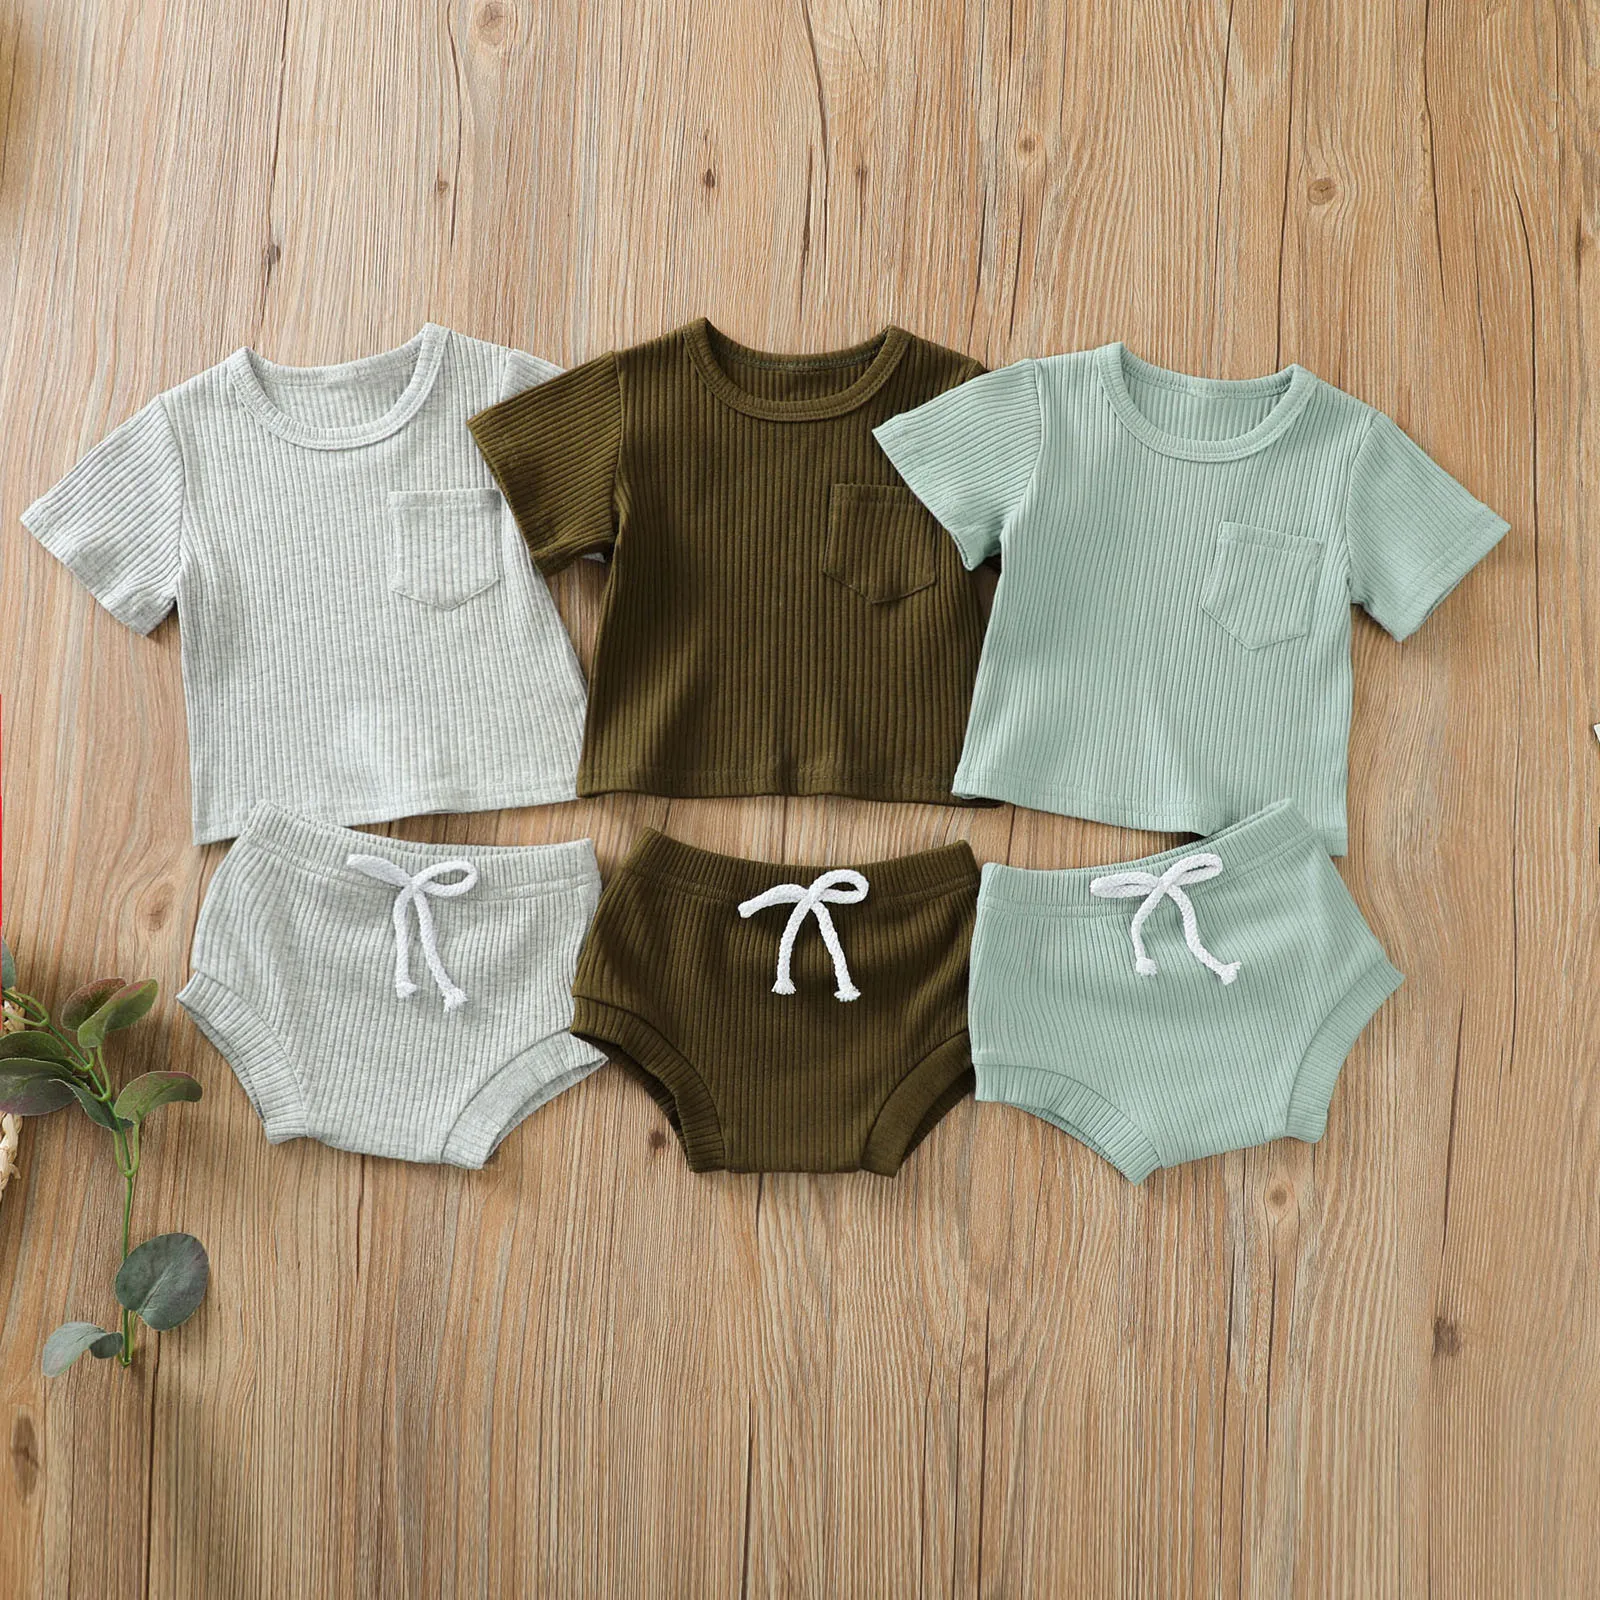 0m-24m Unisex Sets Toddler Baby Boys Girls Solid Button Stripe Pit Short Sleeve Tops+shorts Outfits Cotton Casual Comfy 2pcs Set